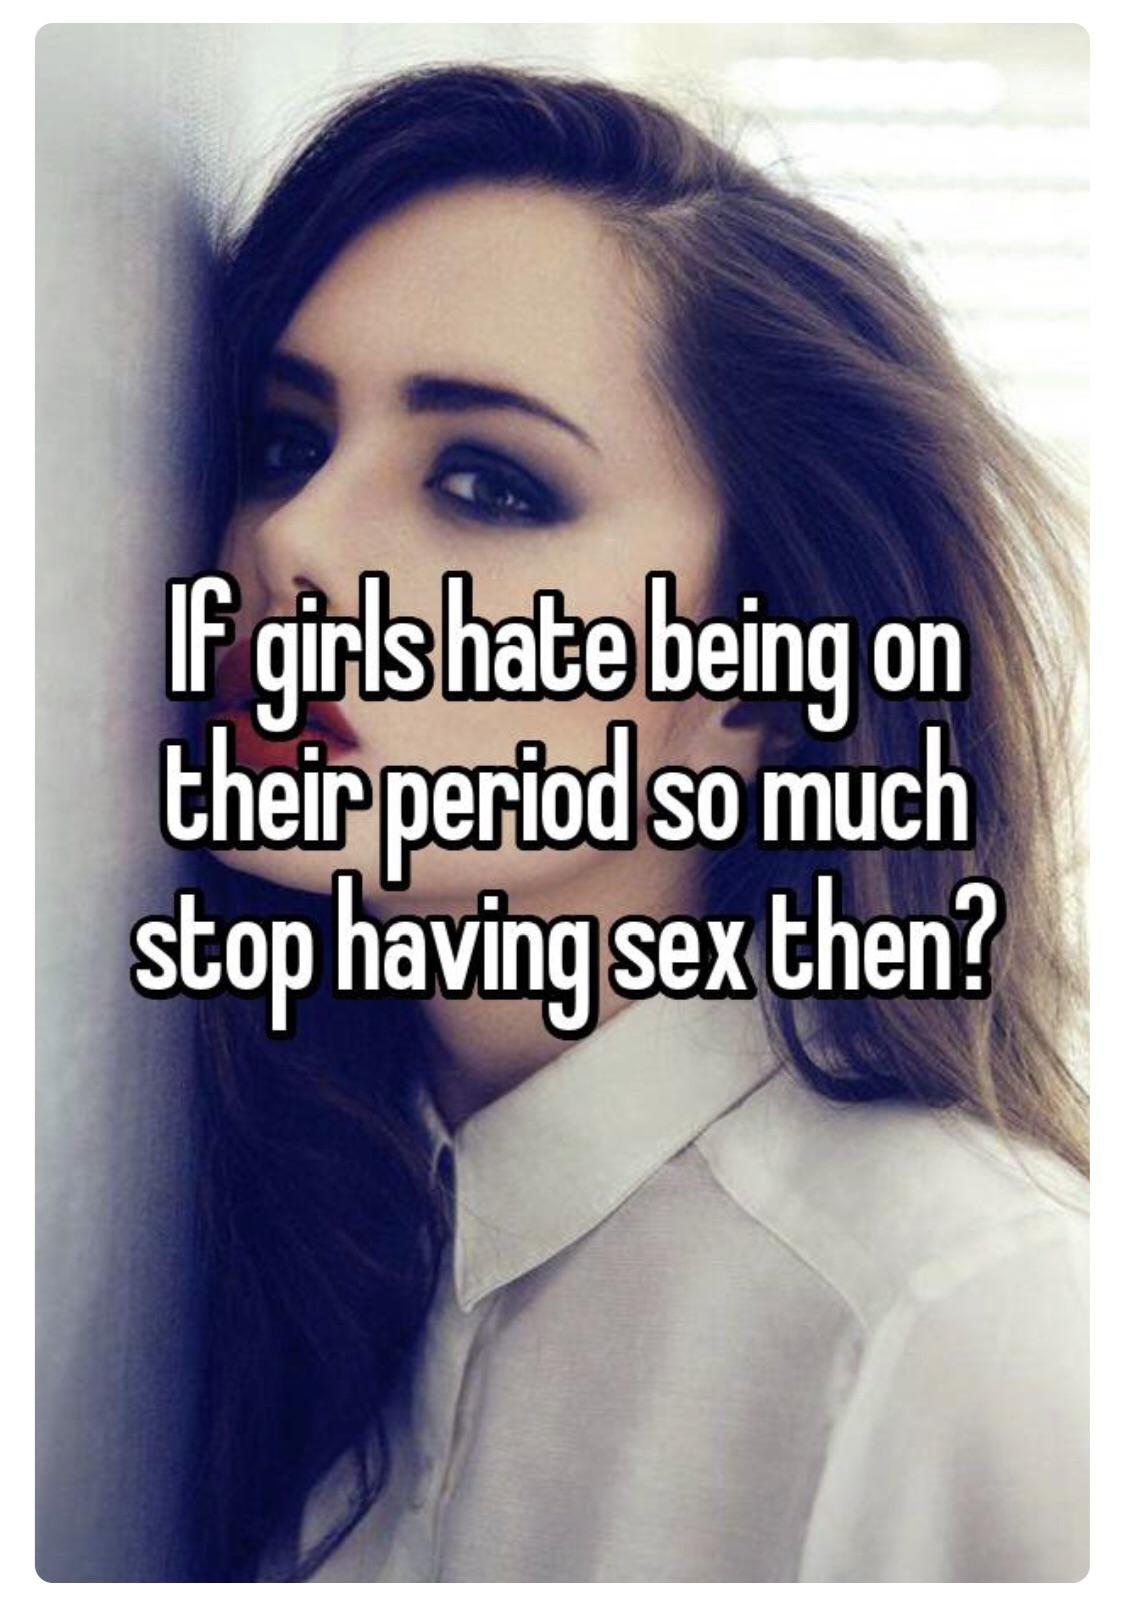 If girls hate being on their period so much stop having sex then?